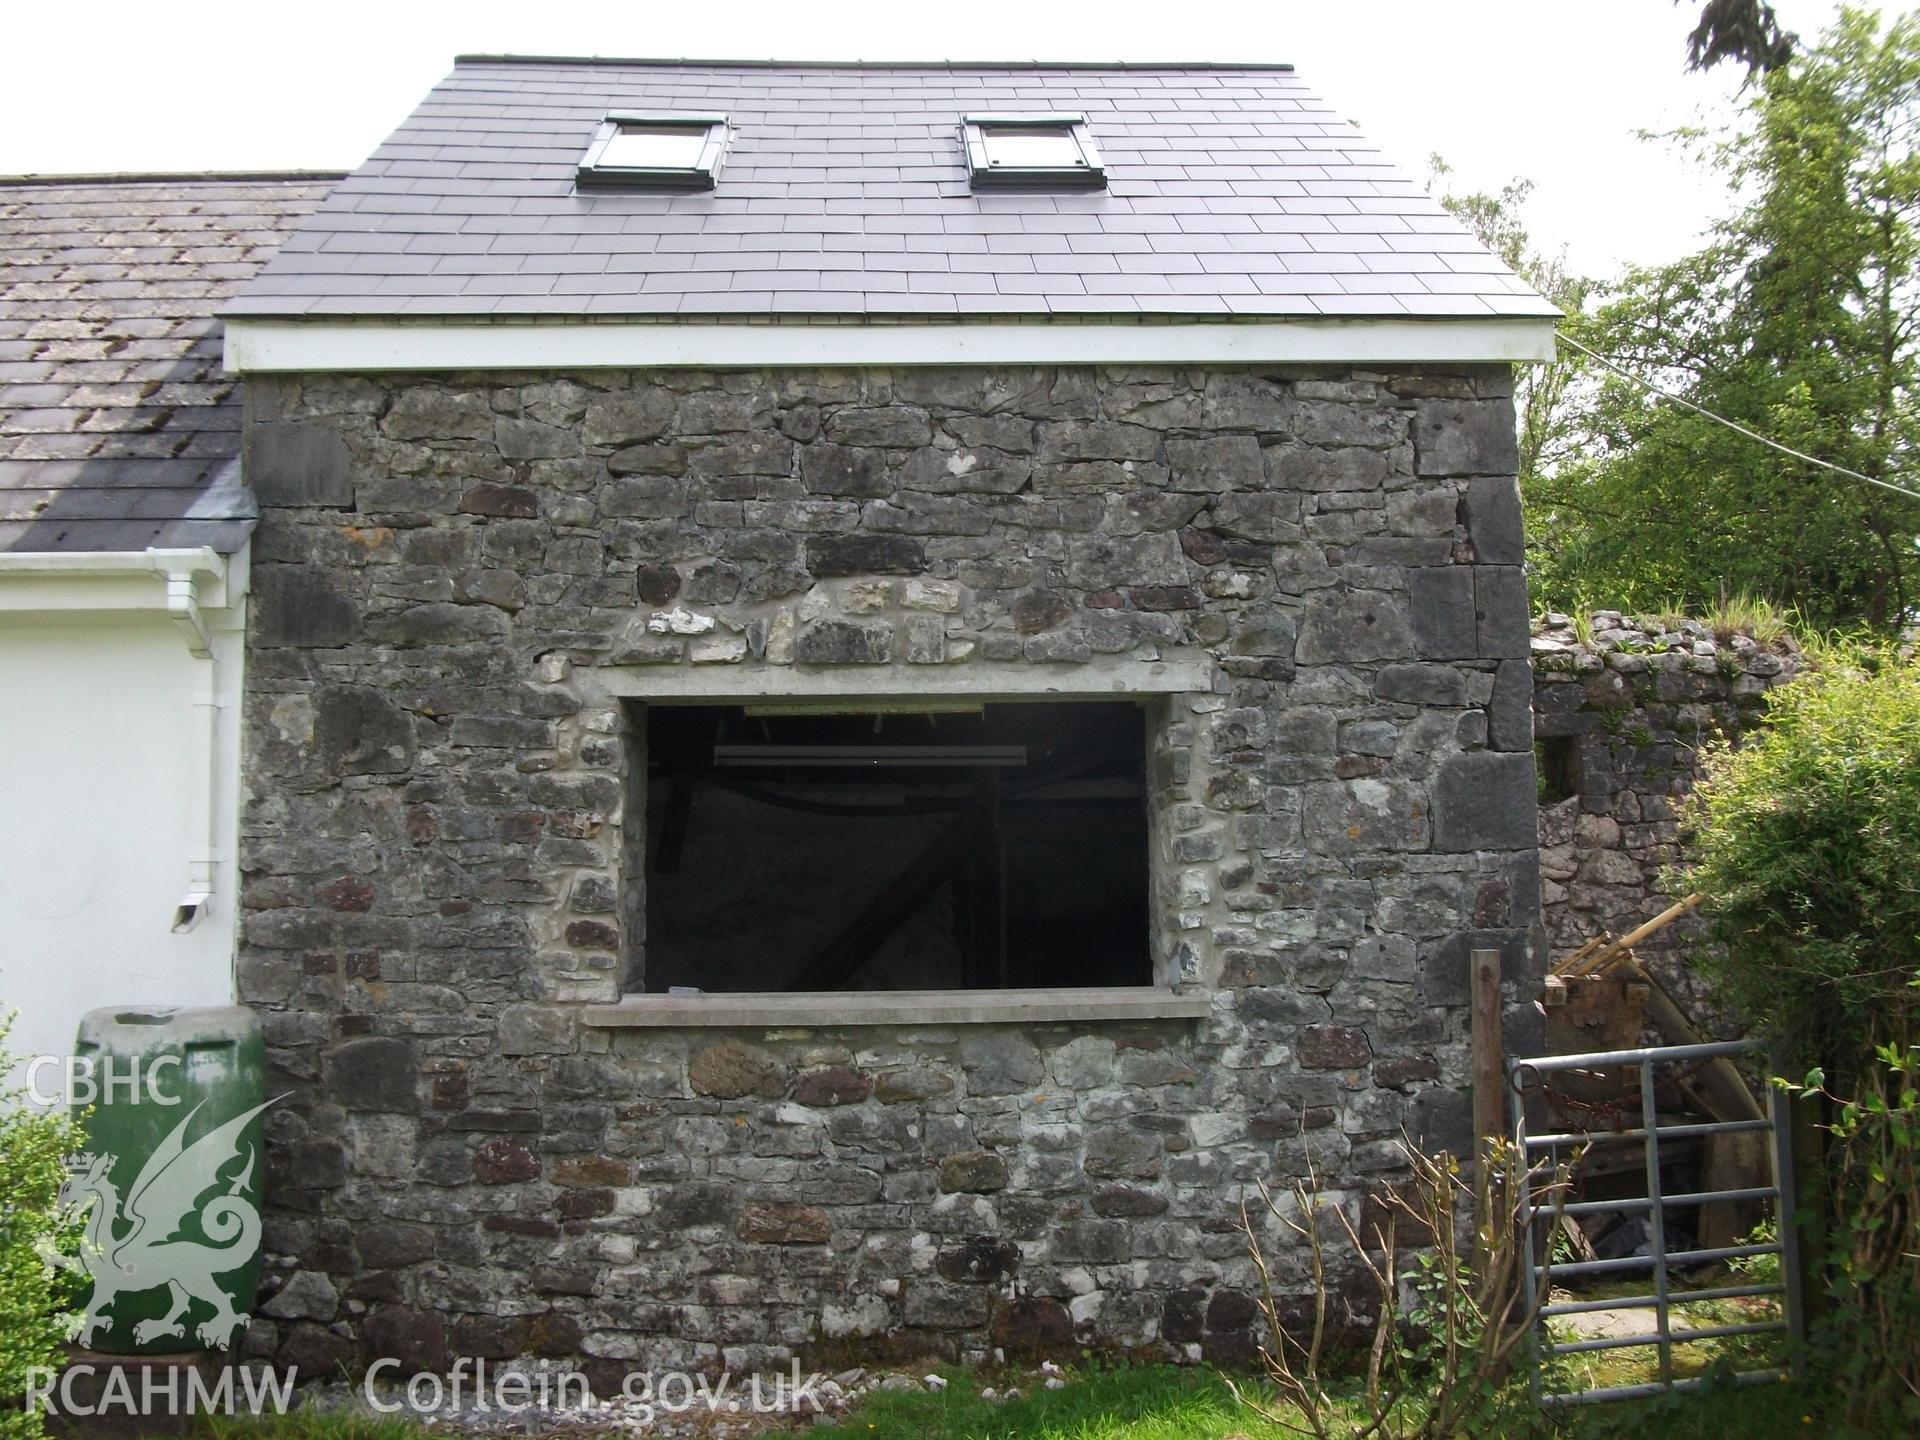 Photograph showing exterior front elevation of the building attached to the cottage at Pant-y-Castell, Maesybont. Photographed by Mark Waghorn to meet a condition attached to planning application.